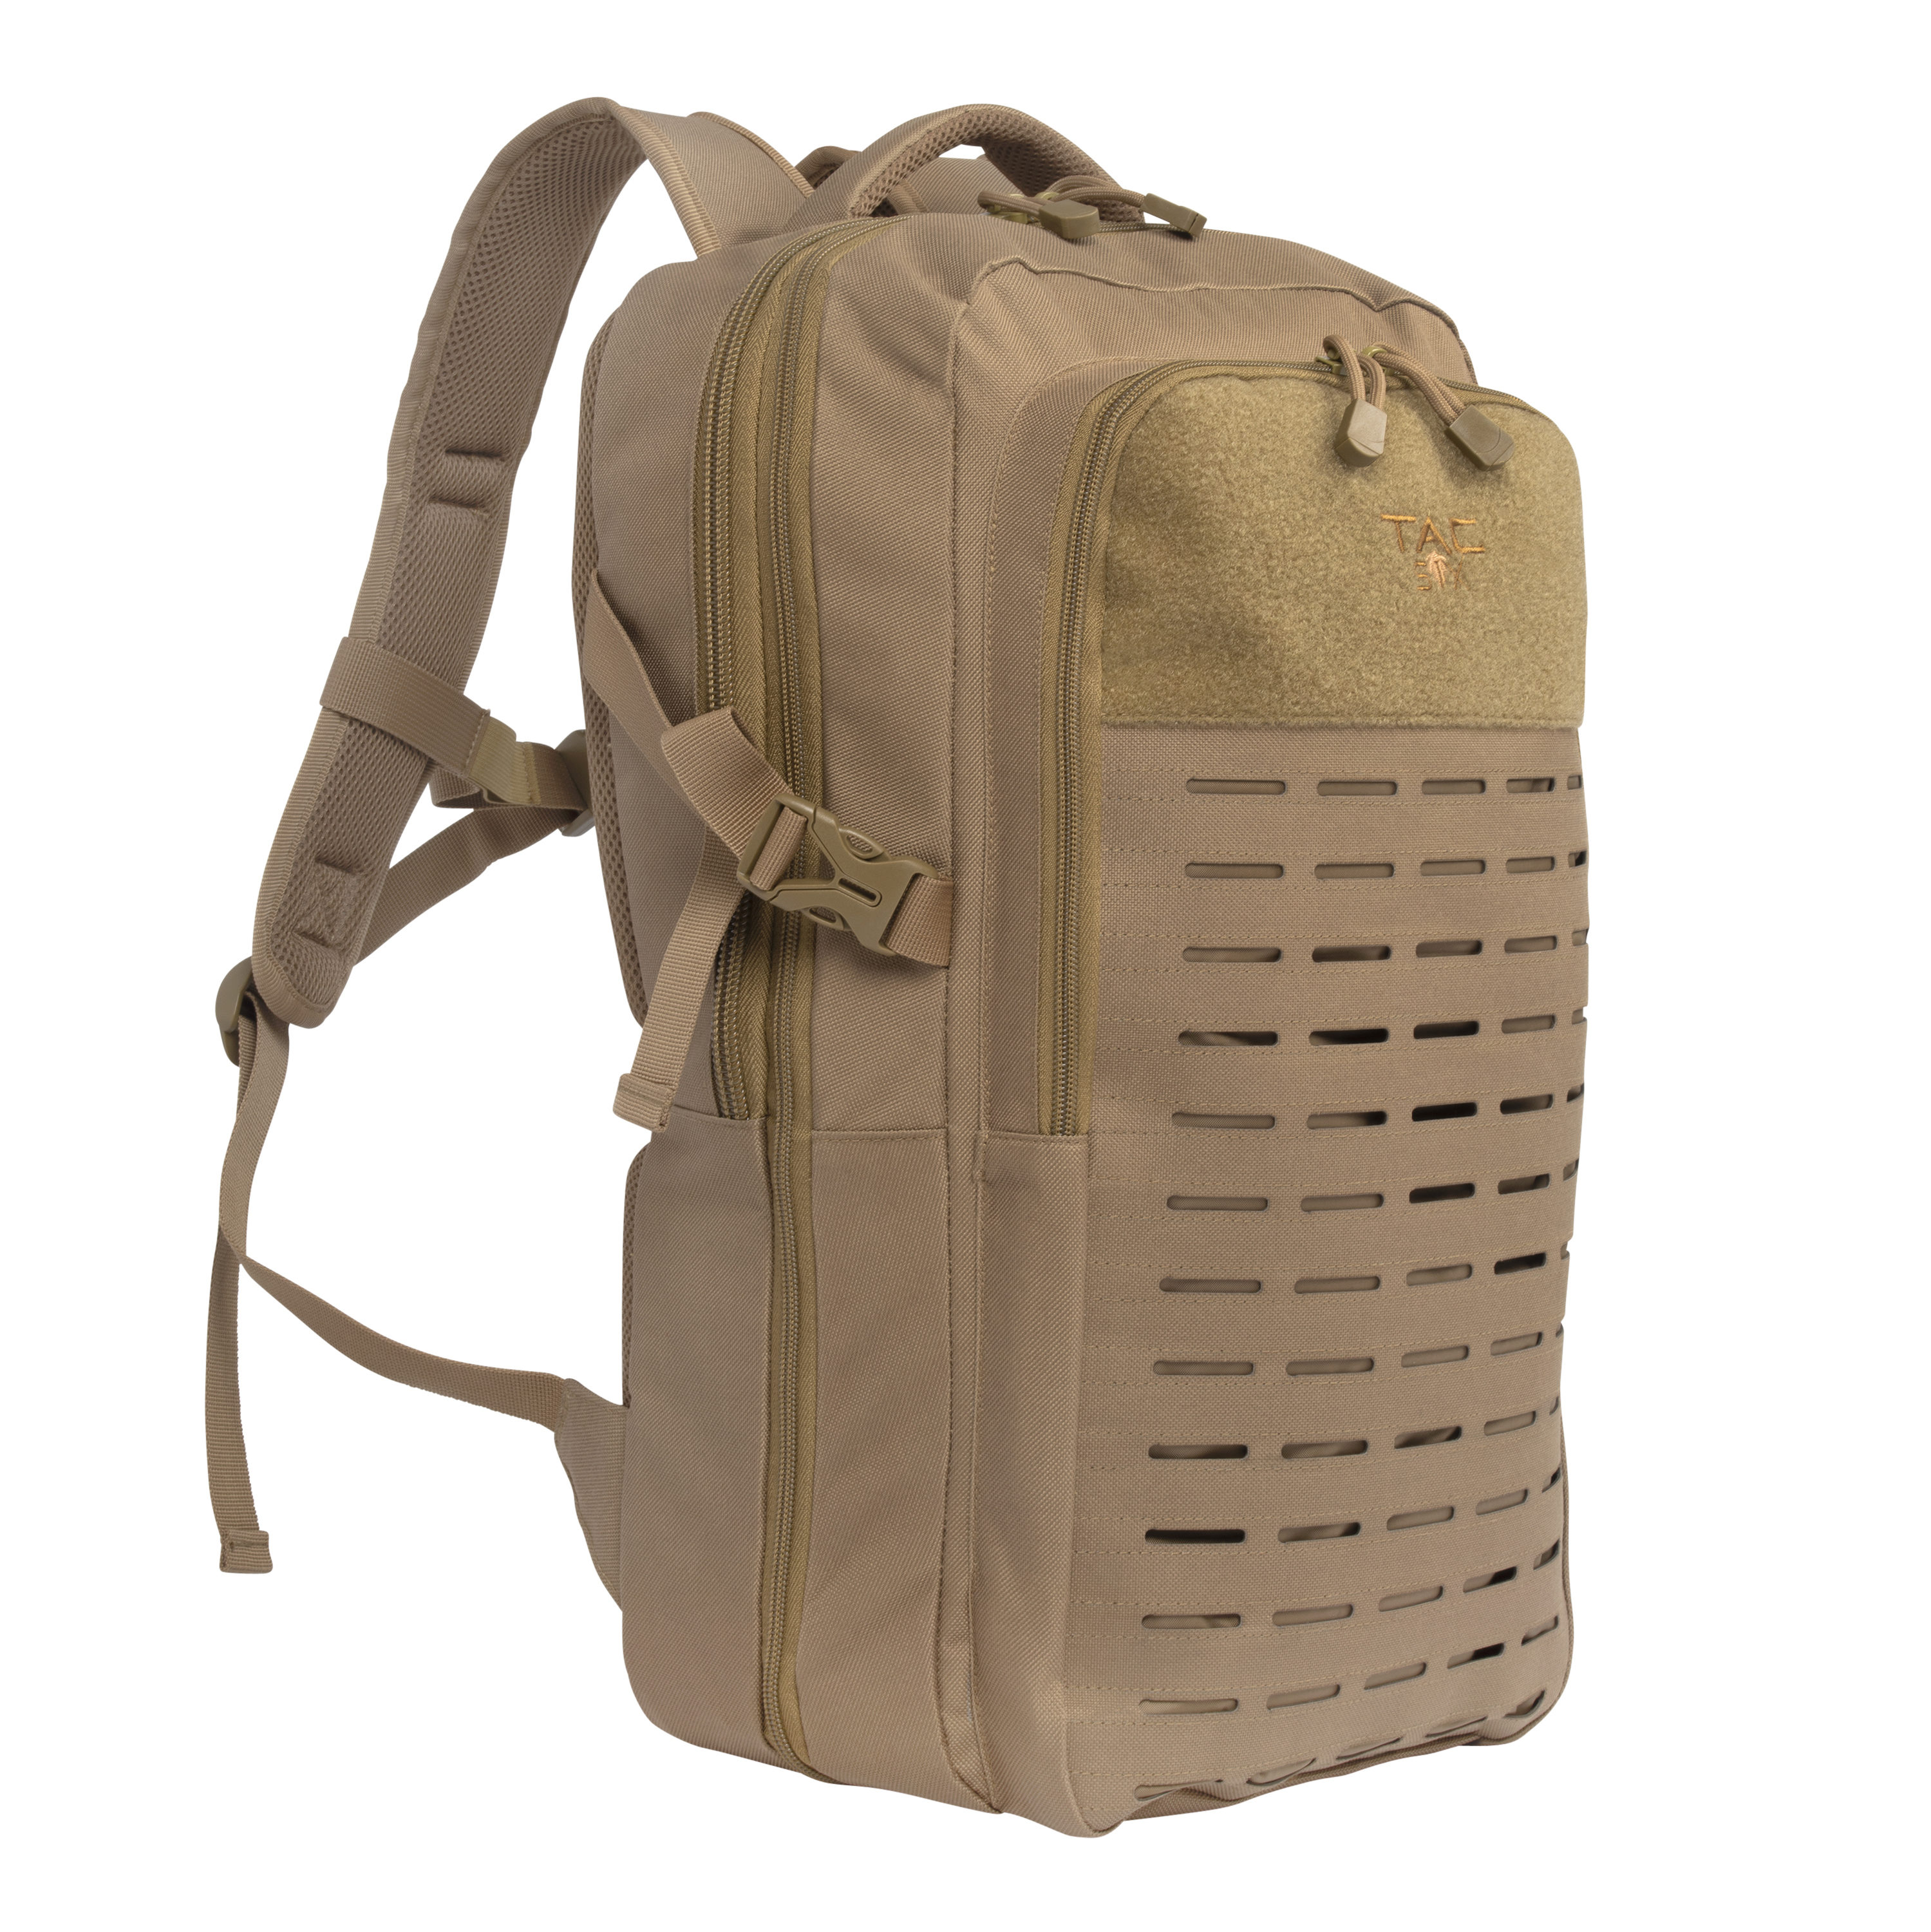 Hurricane Backpack Replacement MOLLE Panel